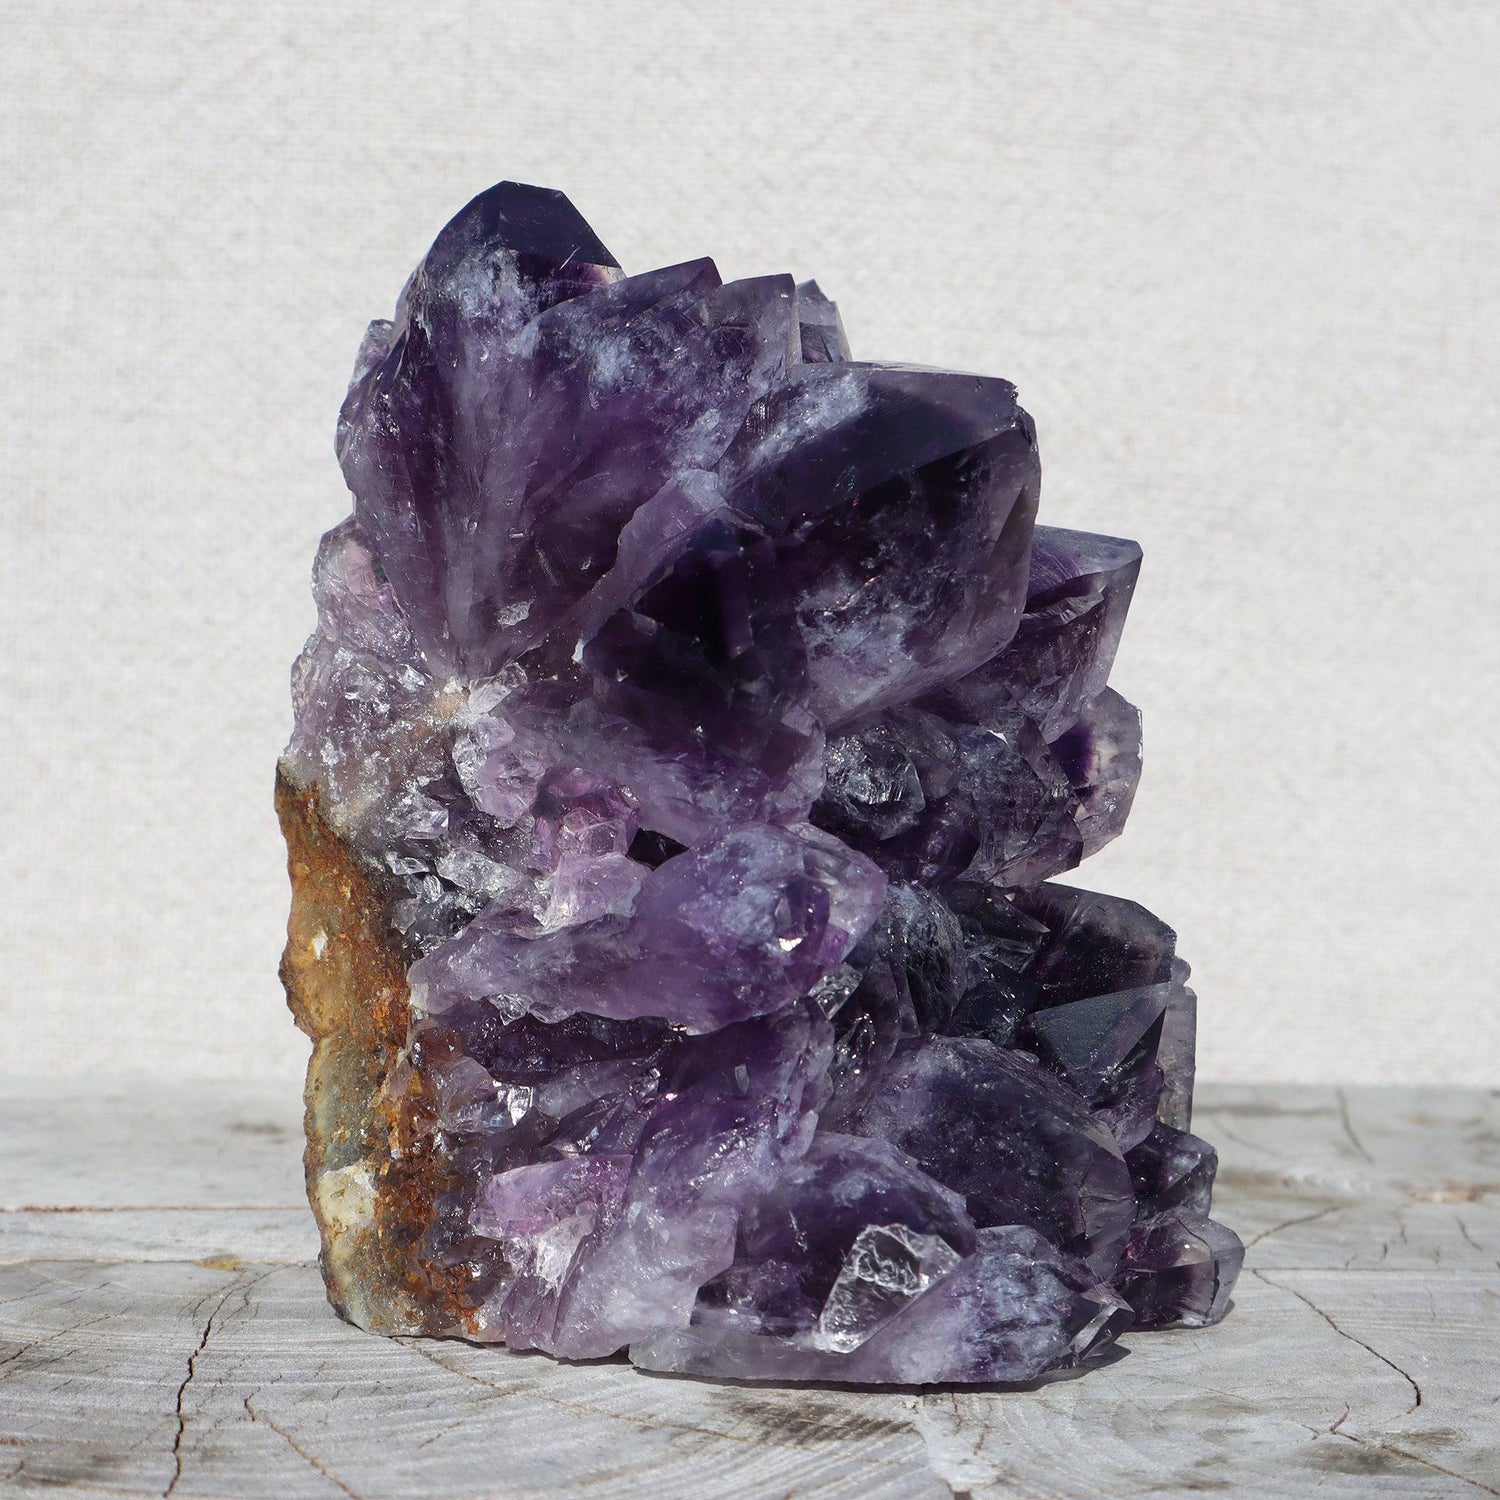 Exceptionally large and rugged, purple amethyst crystals